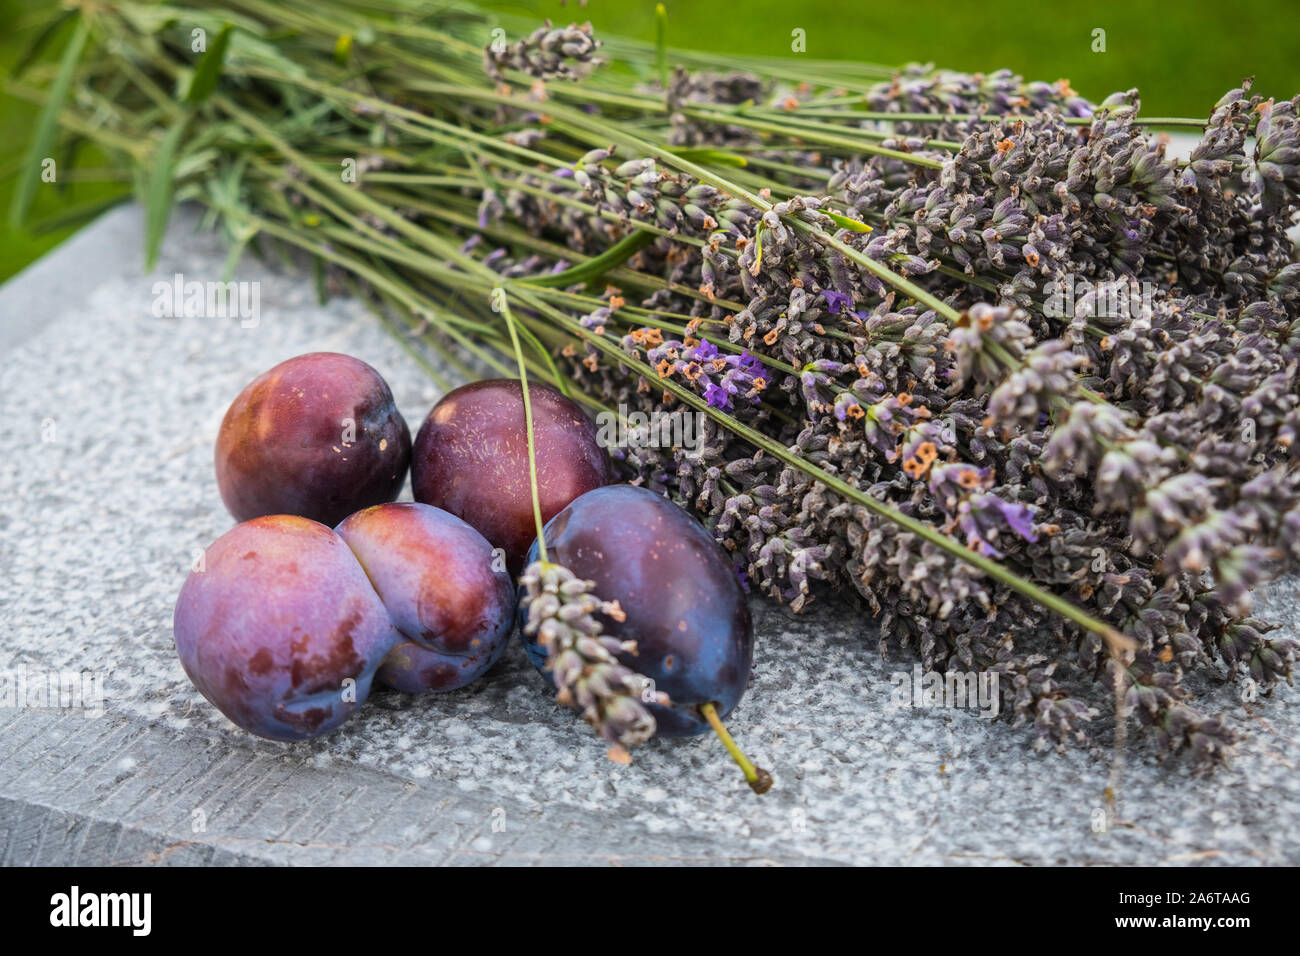 Fresh picked plums with lavender flowers on the stone table outdoors Stock Photo